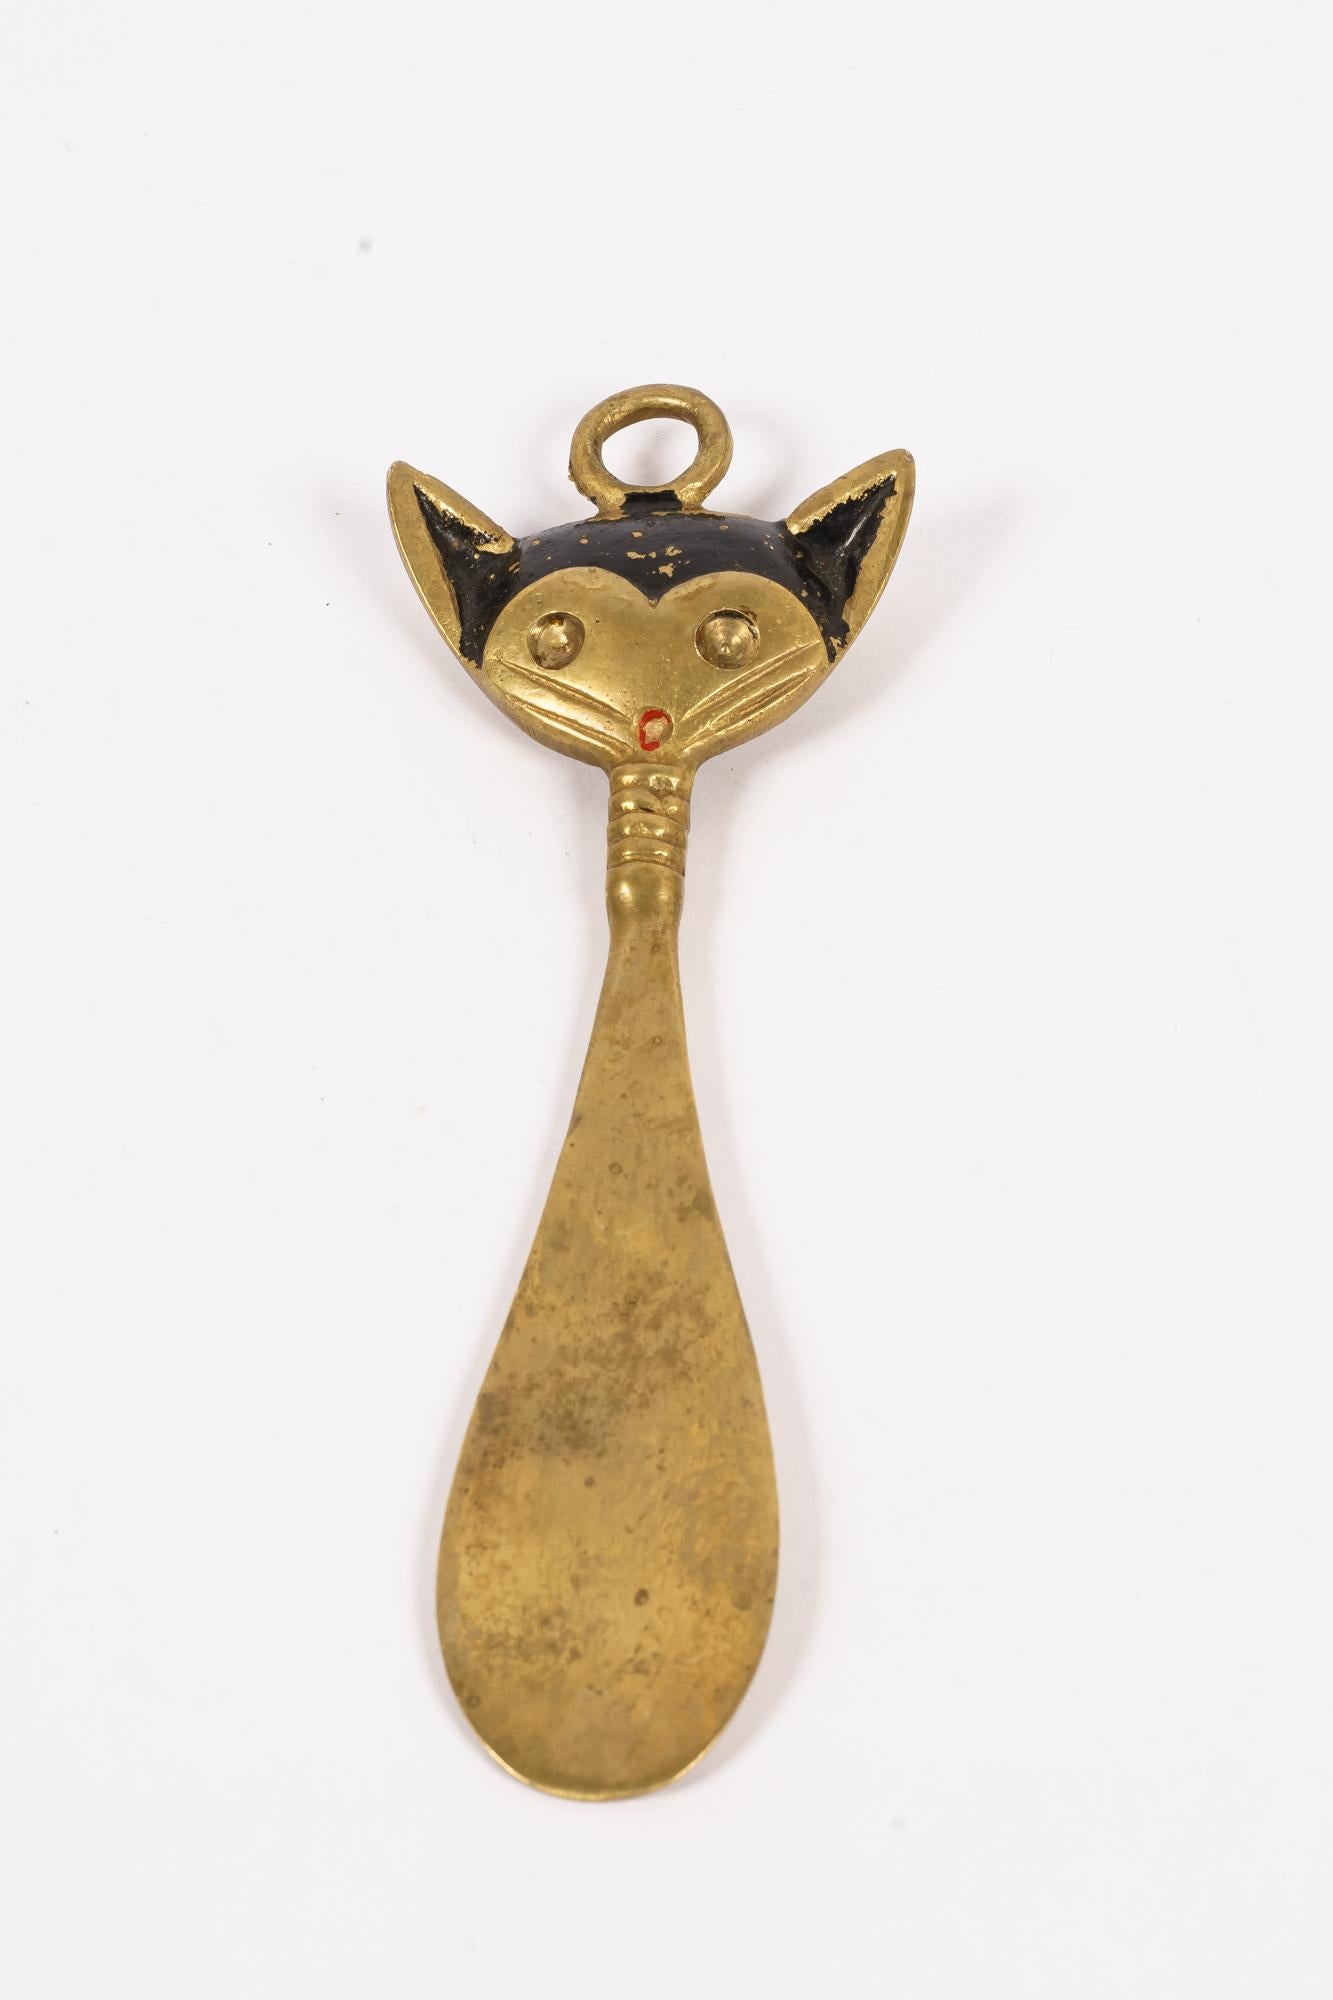 Walter Bosse shoehorn shows a cat, circa 1950s
Original condition.